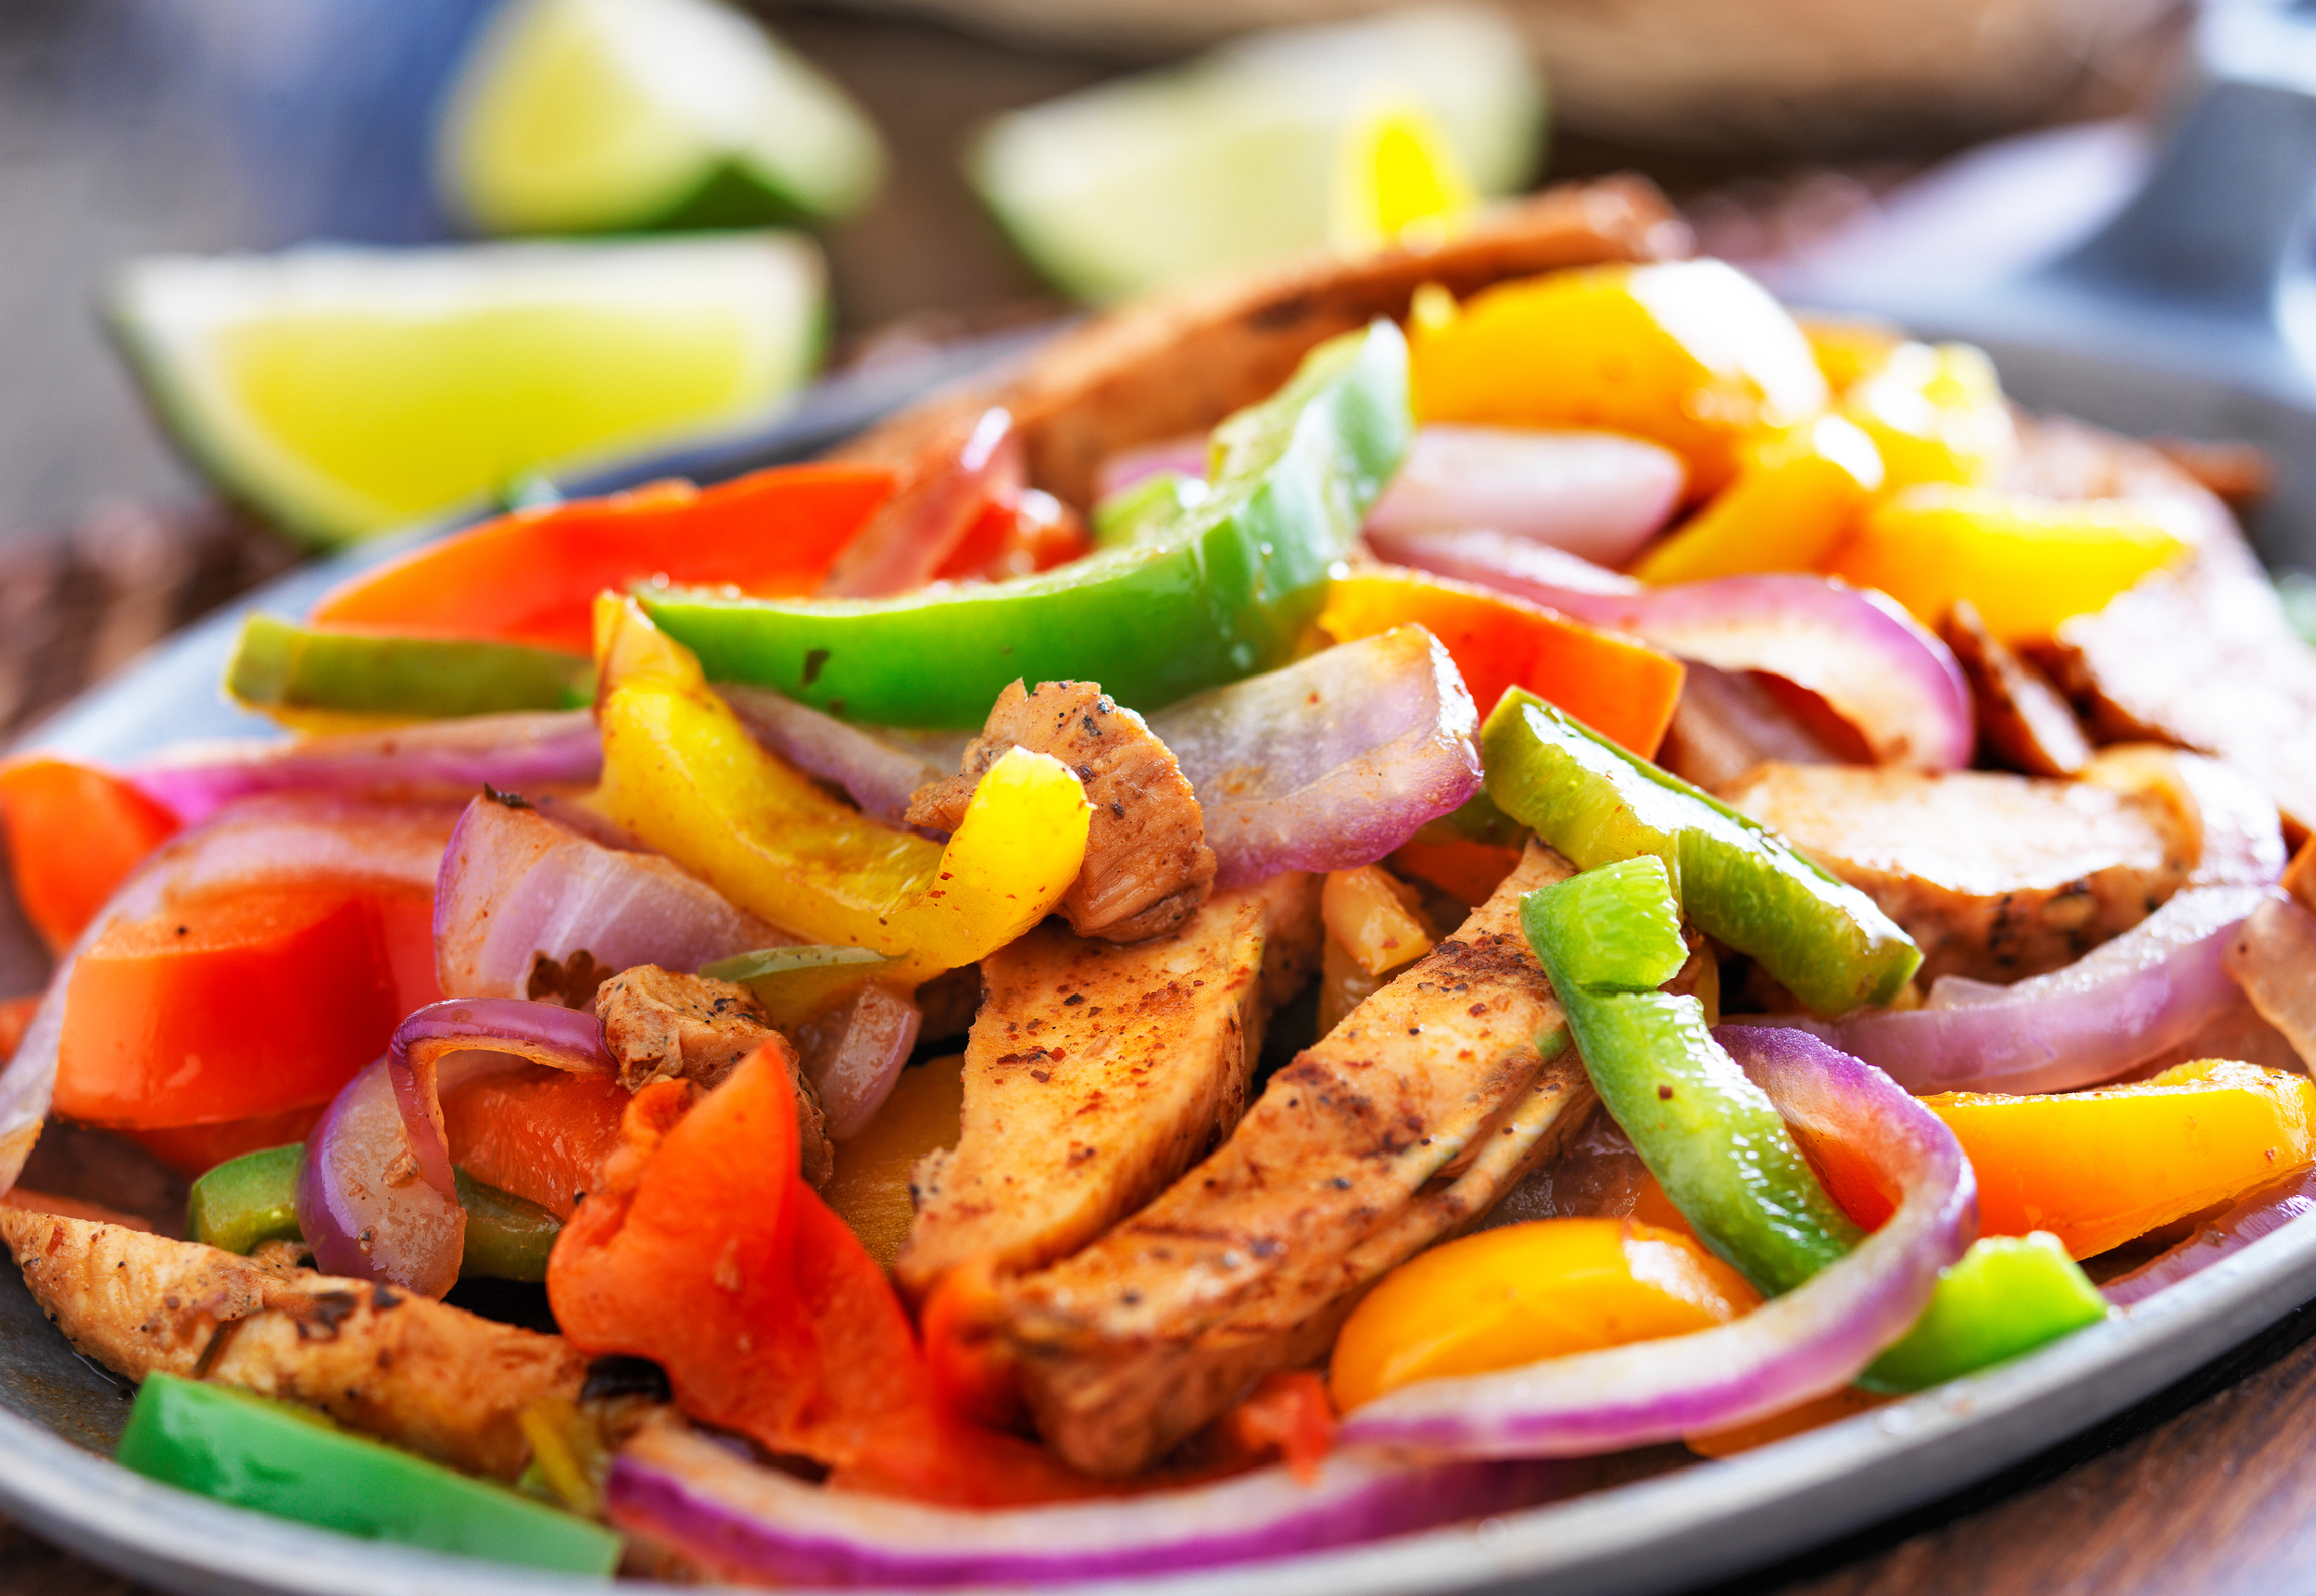 keto chicken fajitas with peppers and red onions